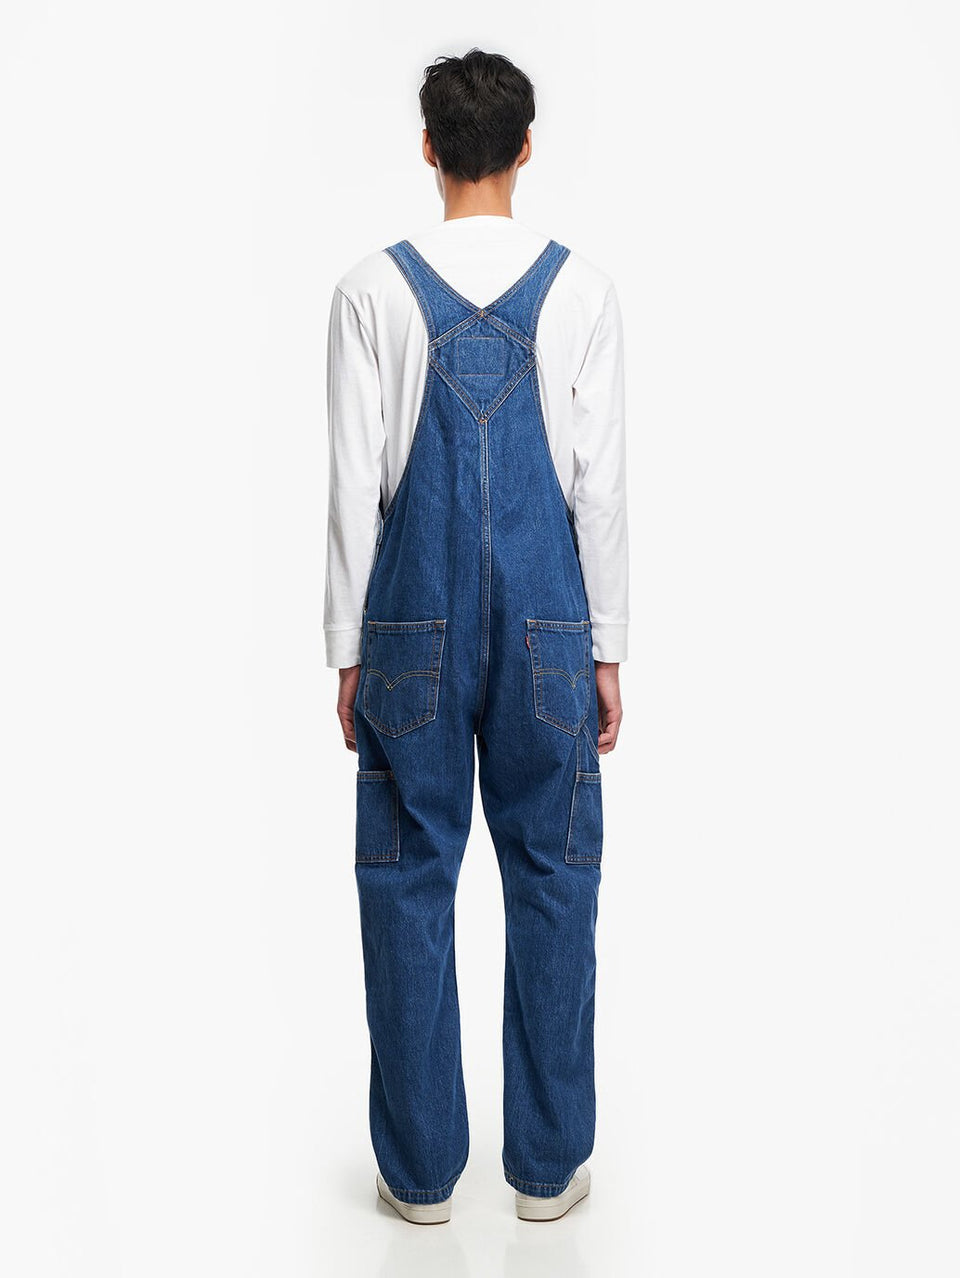 A History of Overalls